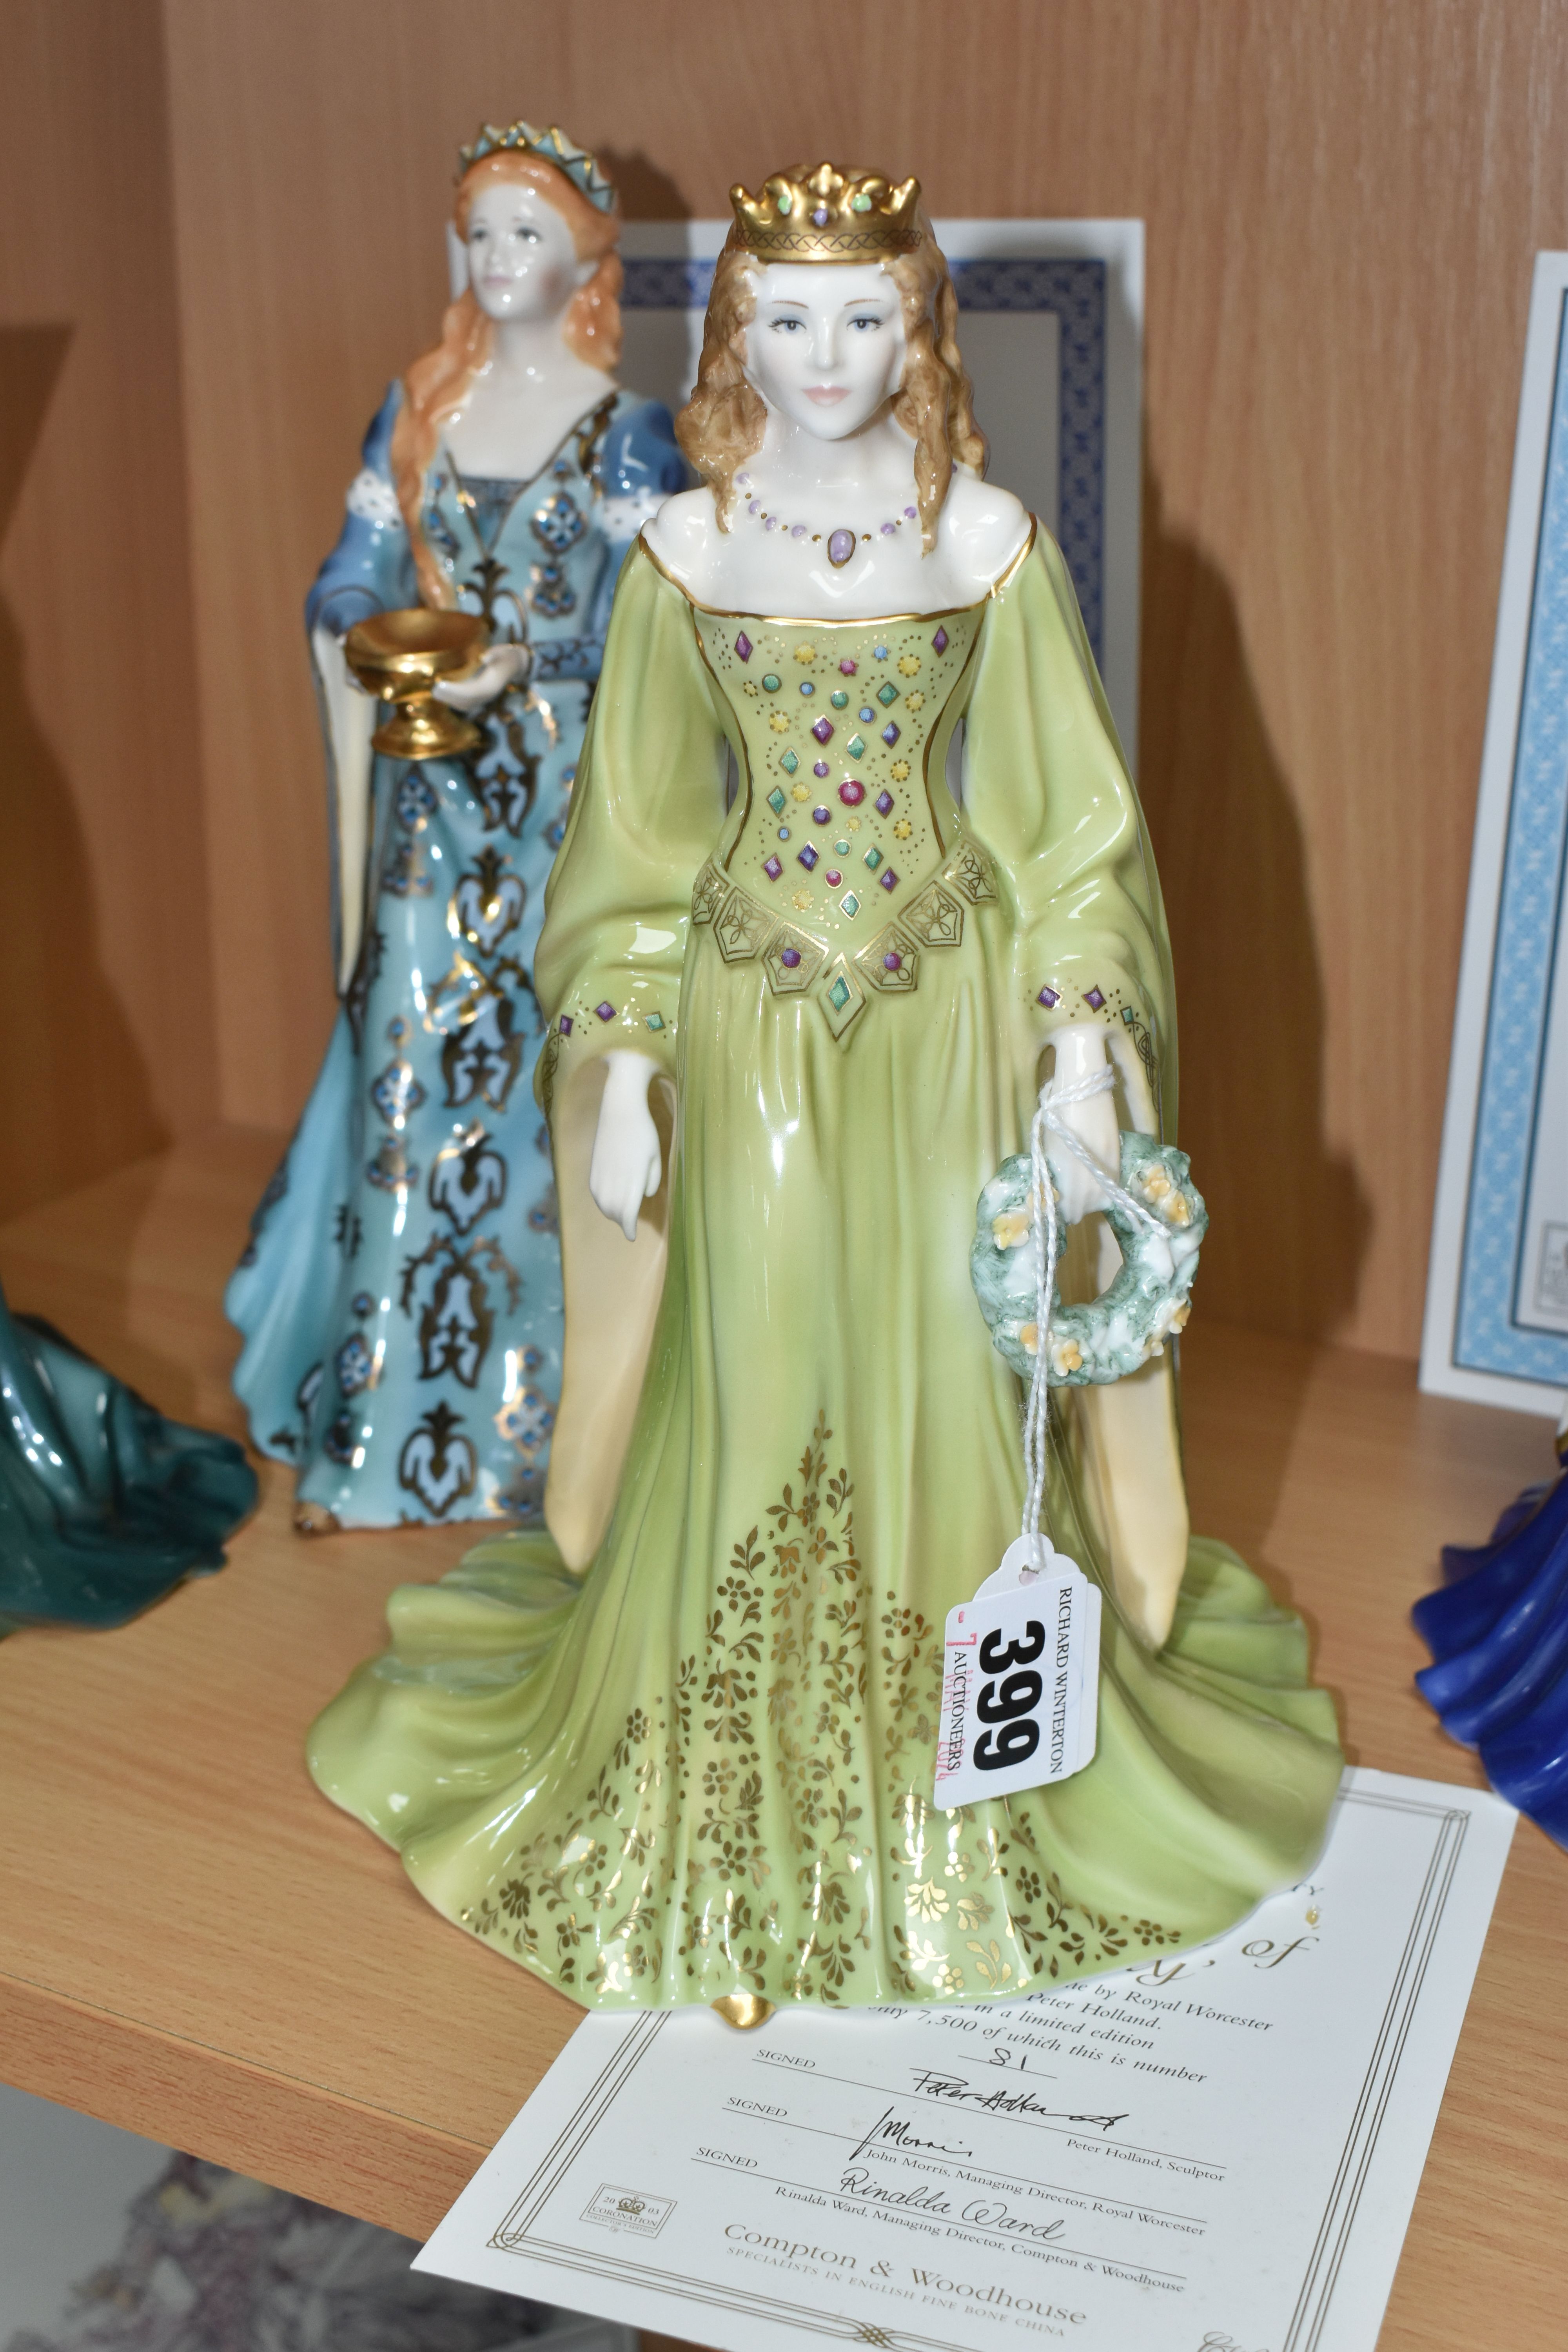 SEVEN ROYAL WORCESTER PETER HOLLAND 'CELTIC' FIGURINES, limited edition for Compton & Woodhouse, - Image 5 of 9